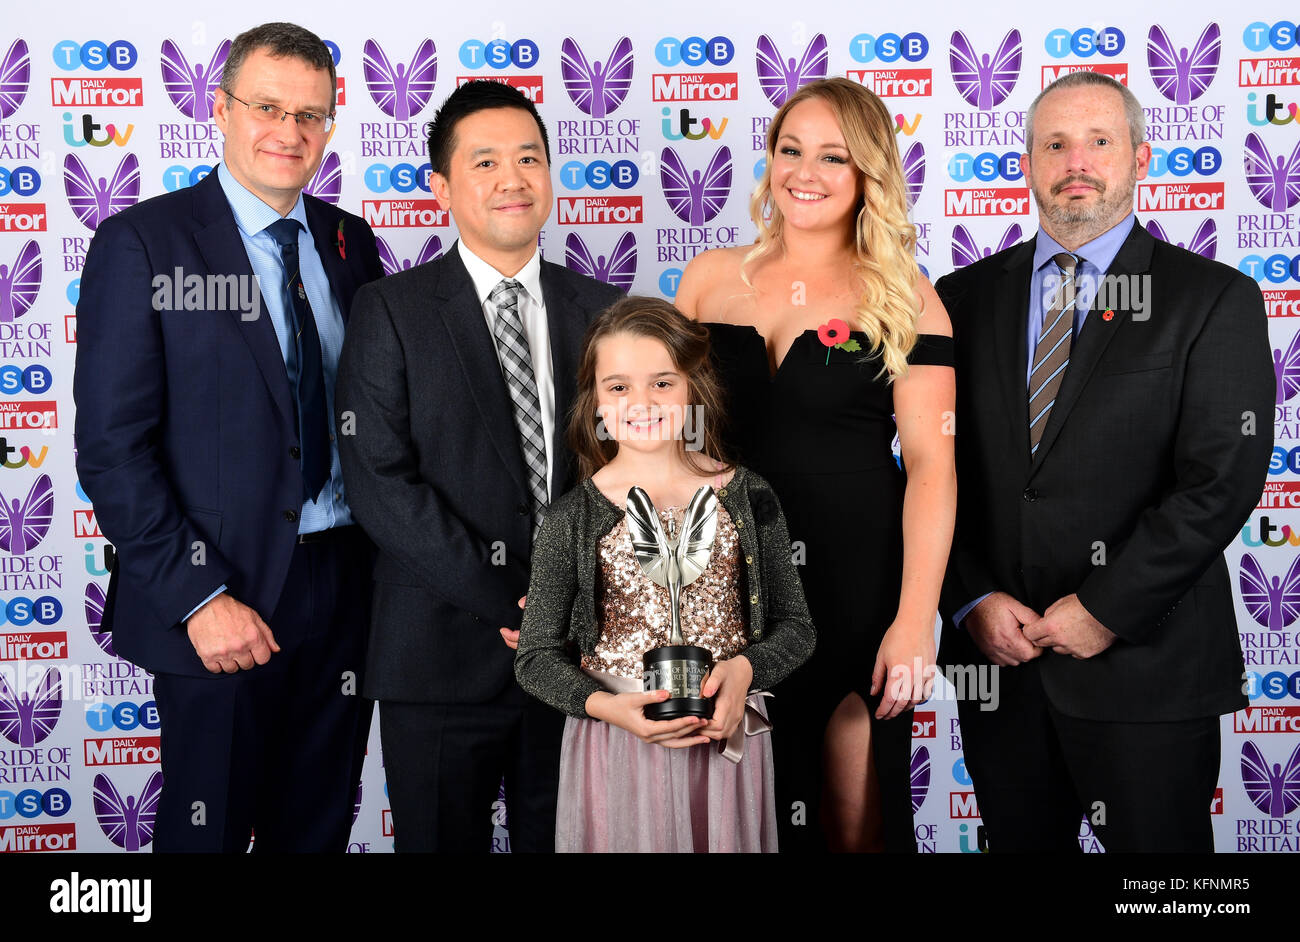 Manchester terror attack Dr's and victims Dr Russell Perkins, (L - R) Jason Wong, Lily Harrison, Lauren Thorpe and Dr Tony Gleeson receive a special recognition award during The Pride of Britain Awards 2017, at Grosvenor House, Park Street, London. Picture Date: Monday 30 October. Photo credit should read: Ian West/PA Wire Stock Photo